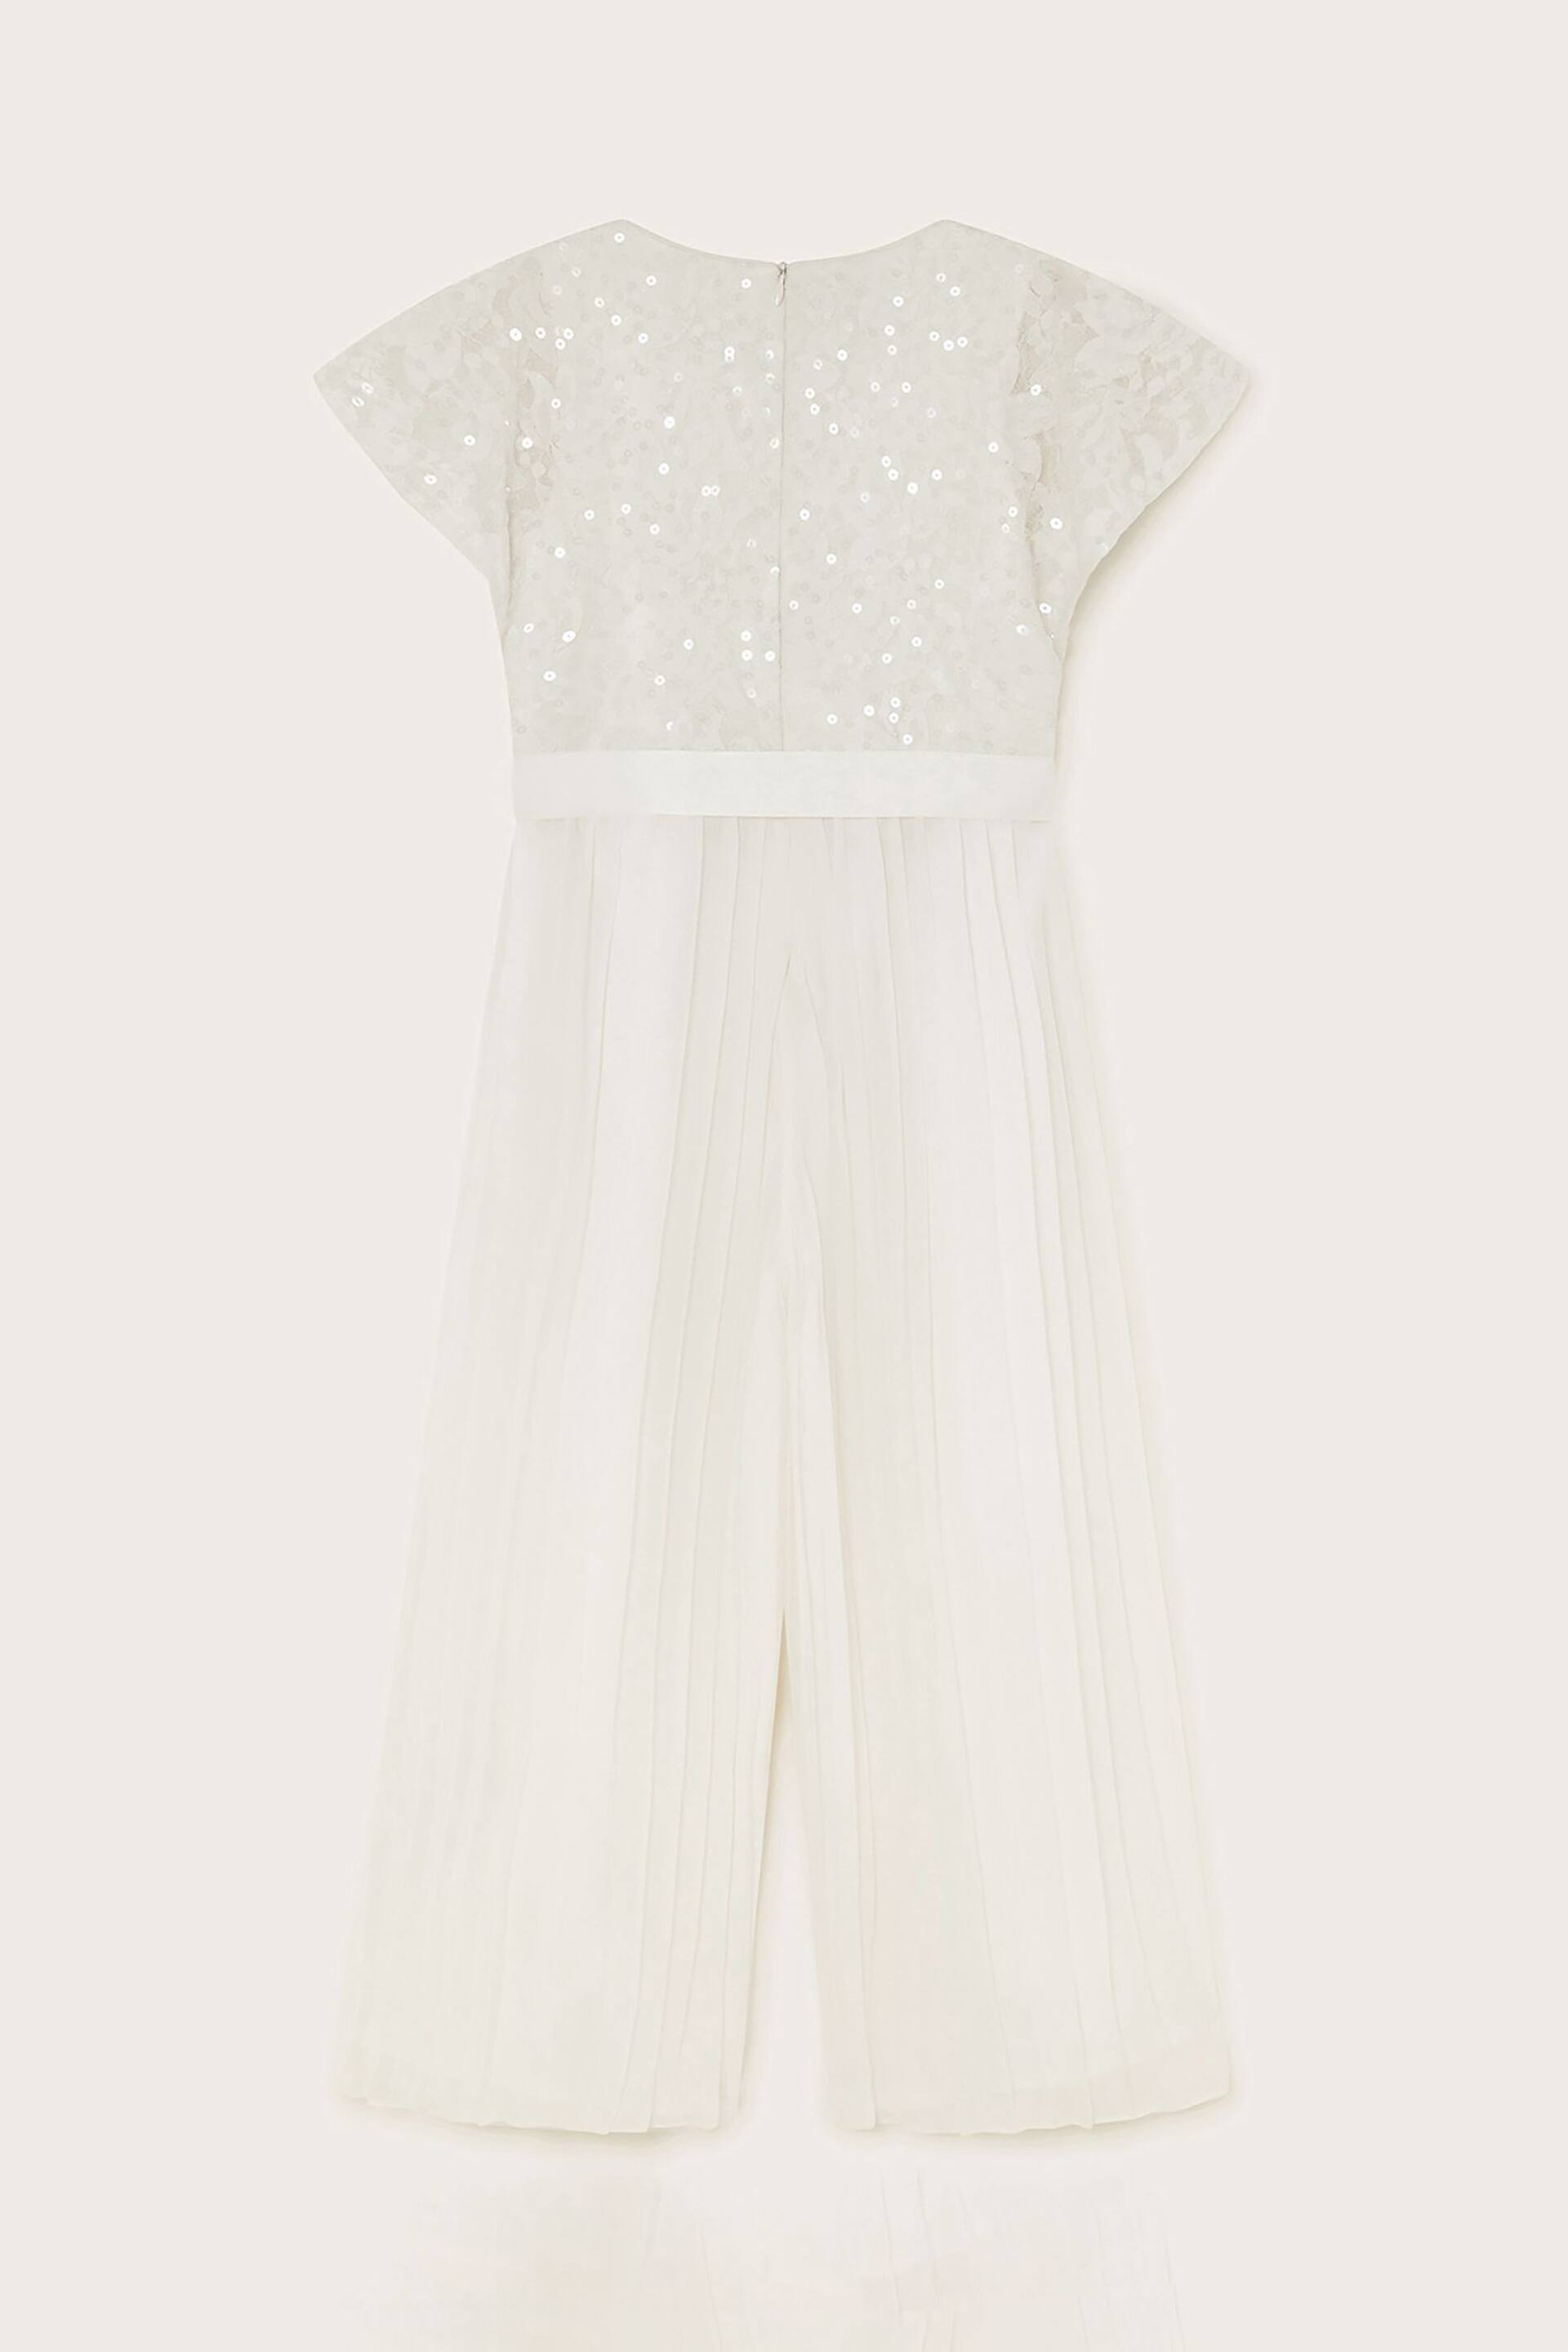 Monsoon White Sequin Lacey Cape Jumpsuit - Image 2 of 3